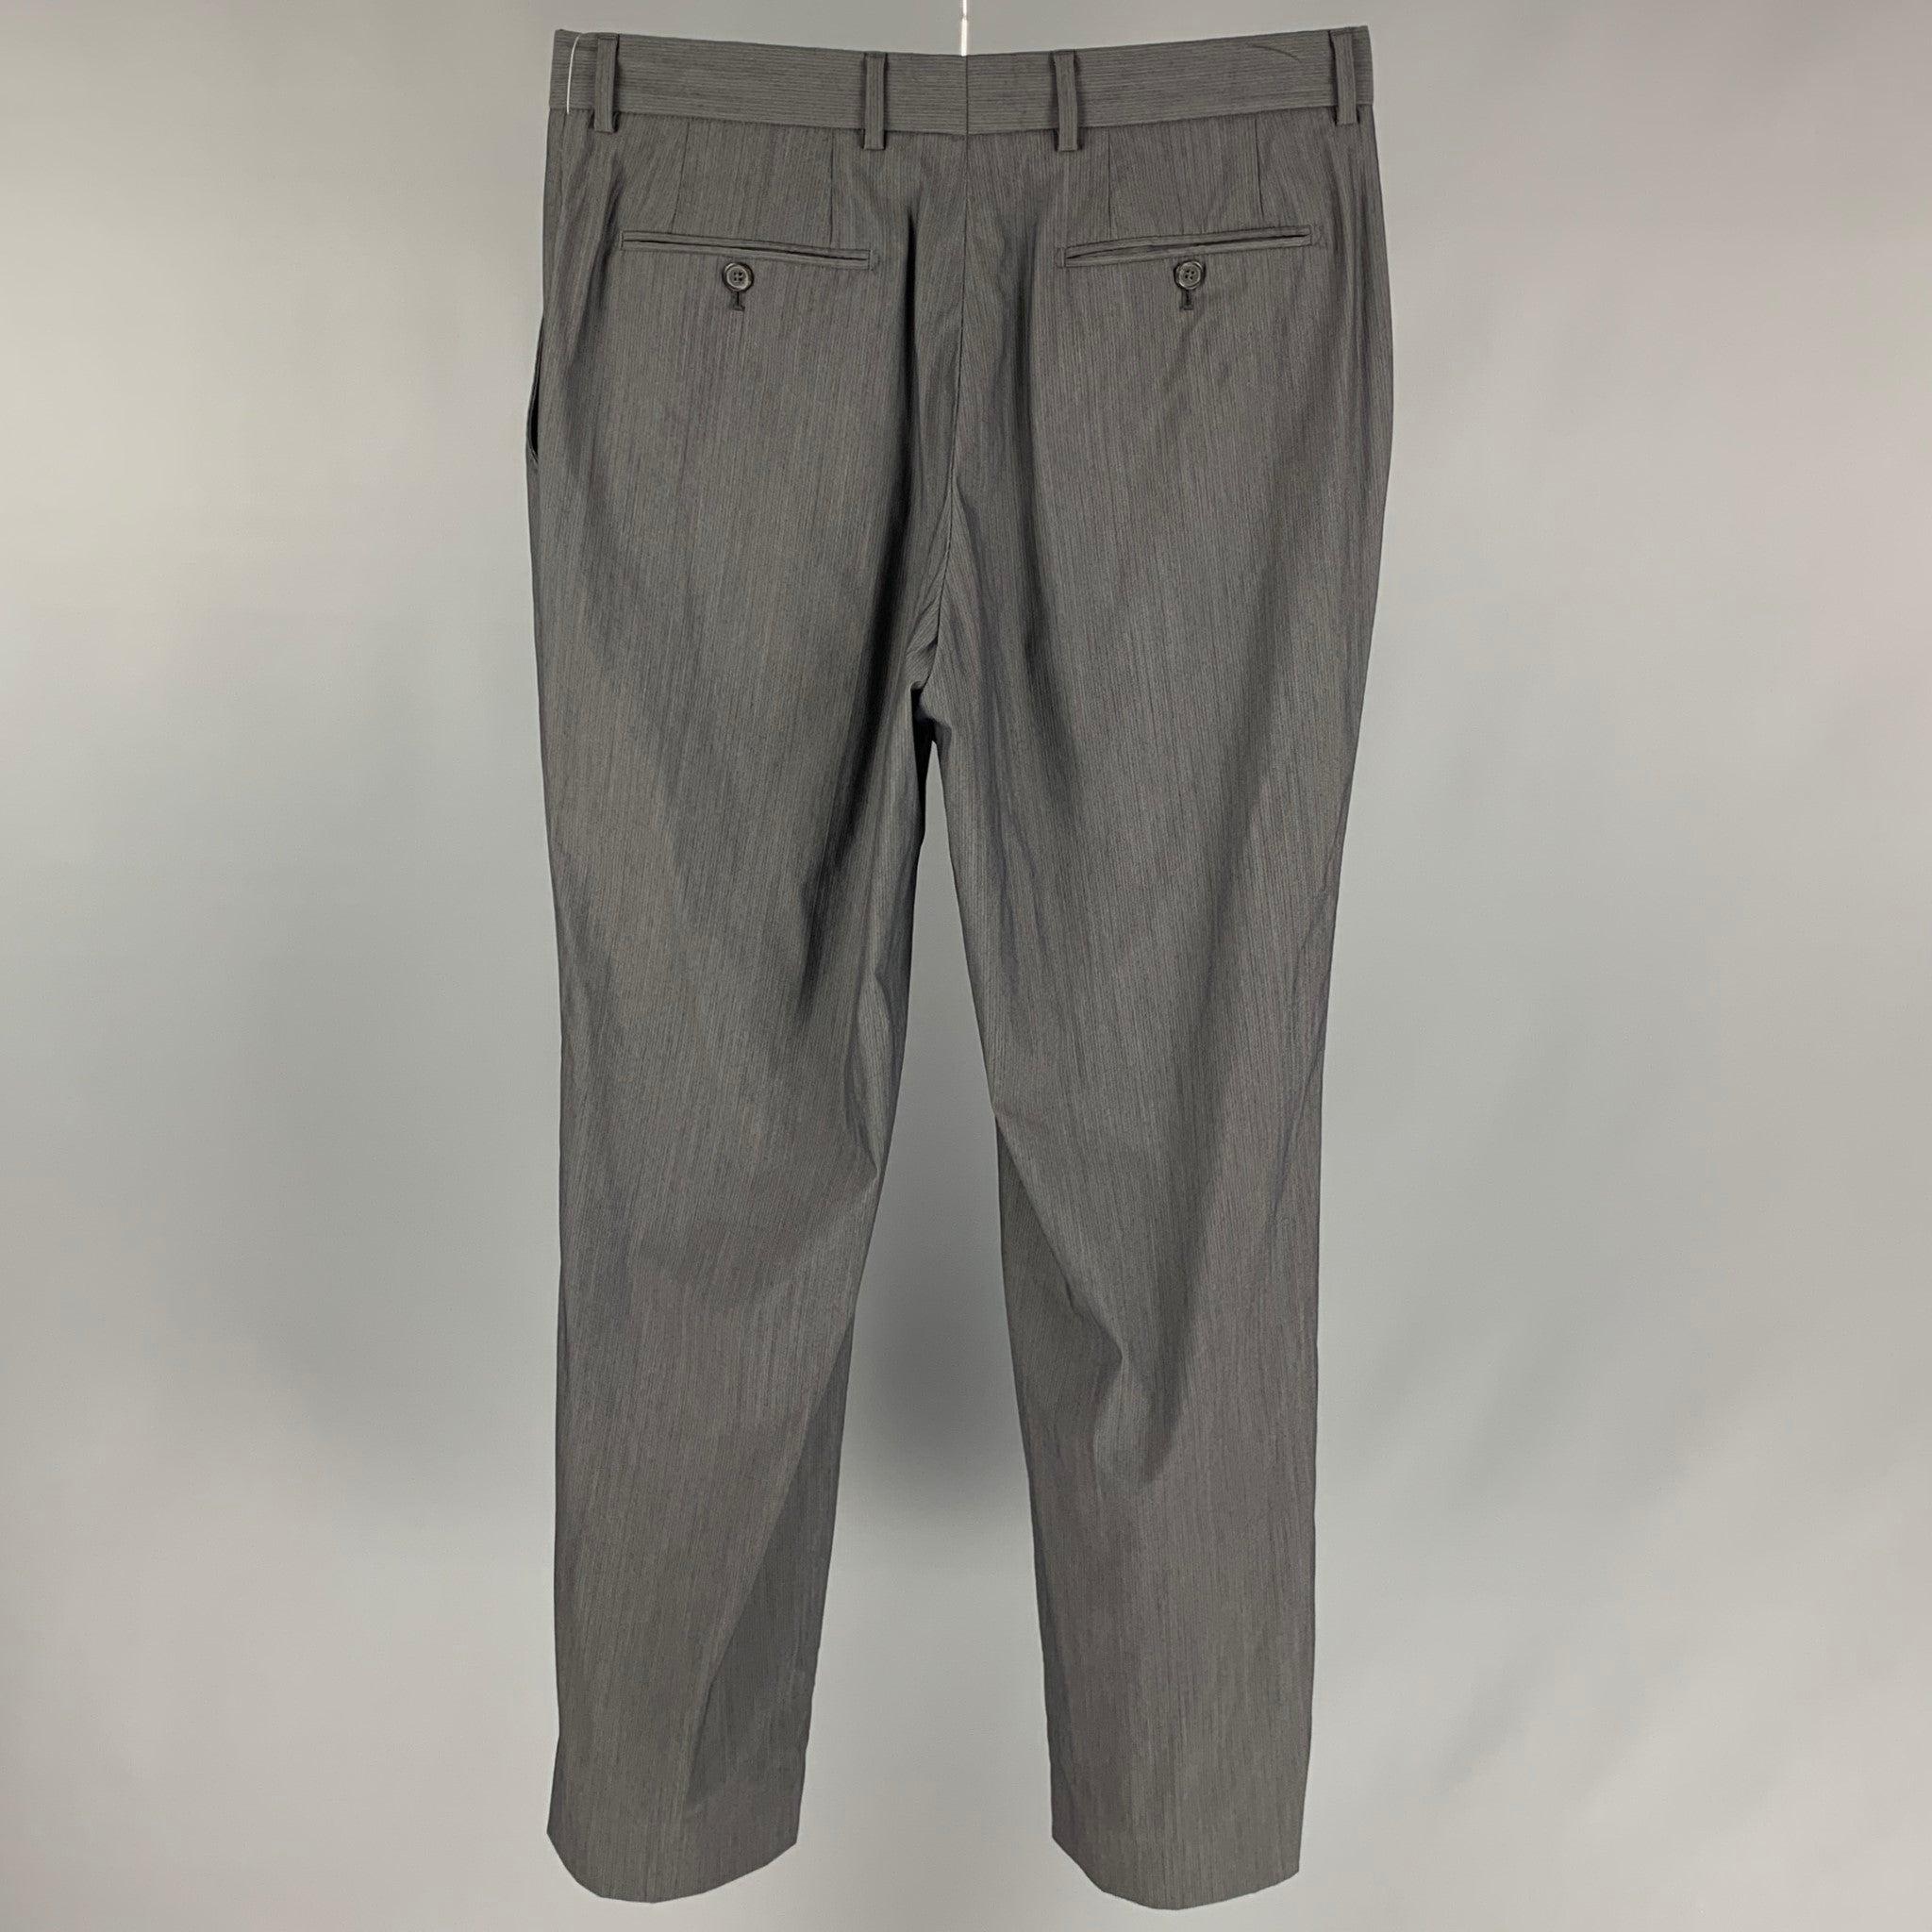 ARMAND BASI dress pants comes in a grey stripe wool blend featuring a flat front, straight leg, single button, and a zip fly closure.
 Very Good Pre-Owned Condition. 
 

 Marked:  EU 42 / UK 32 / US 32 
 

 Measurements: 
  Waist: 32 inches Rise: